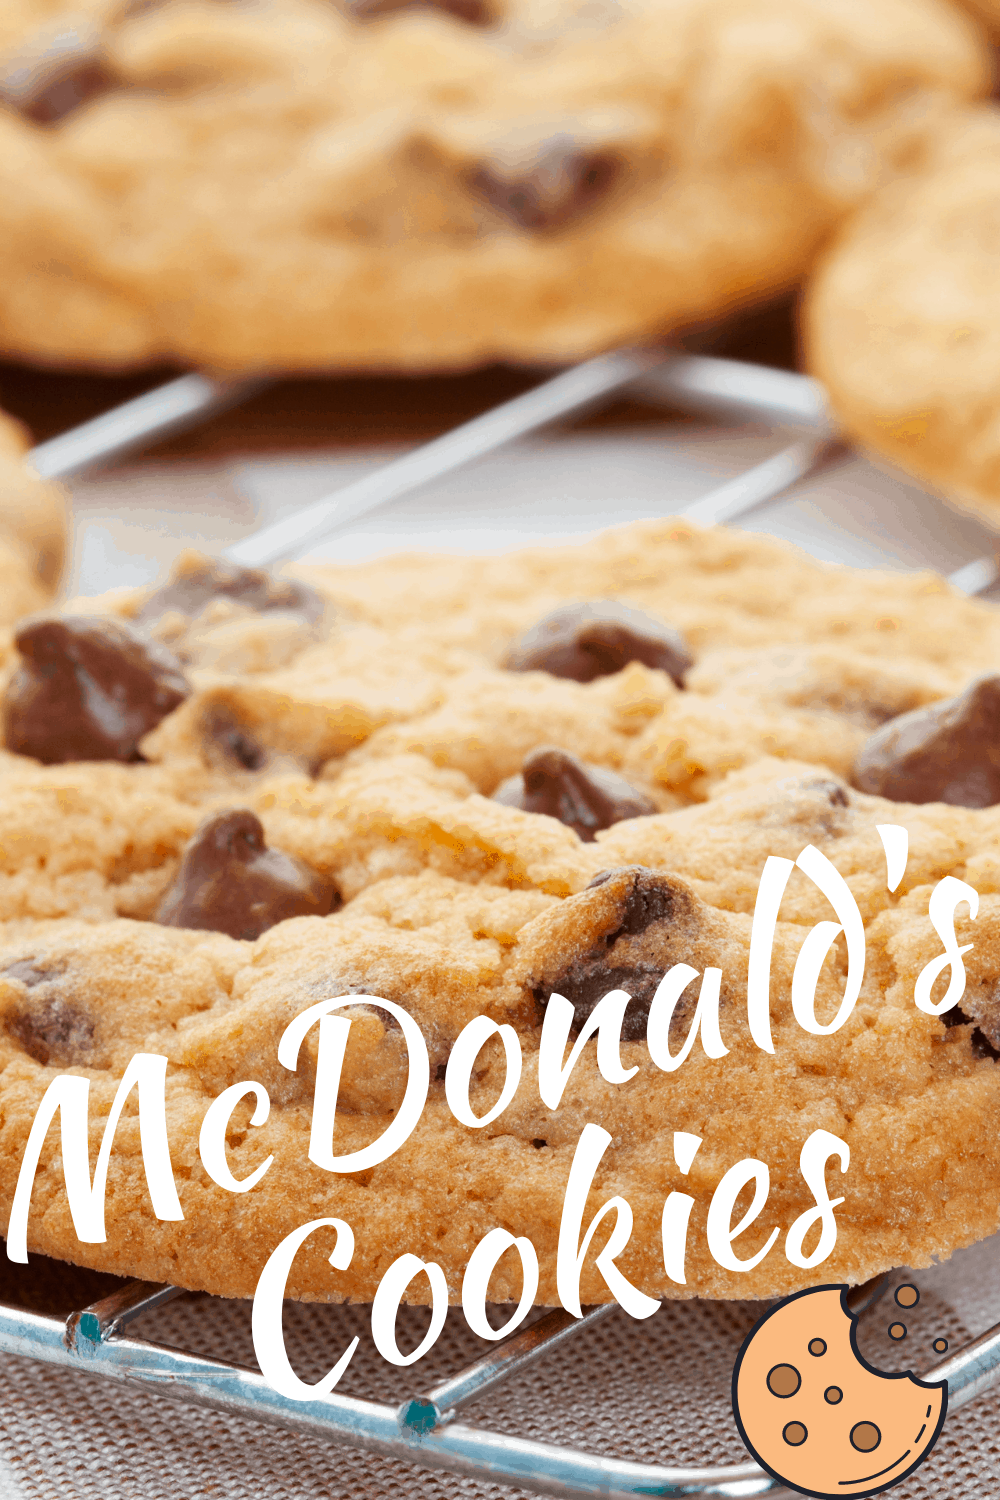 New Kitchen Special McDonald’s Chocolate Chip Cookies